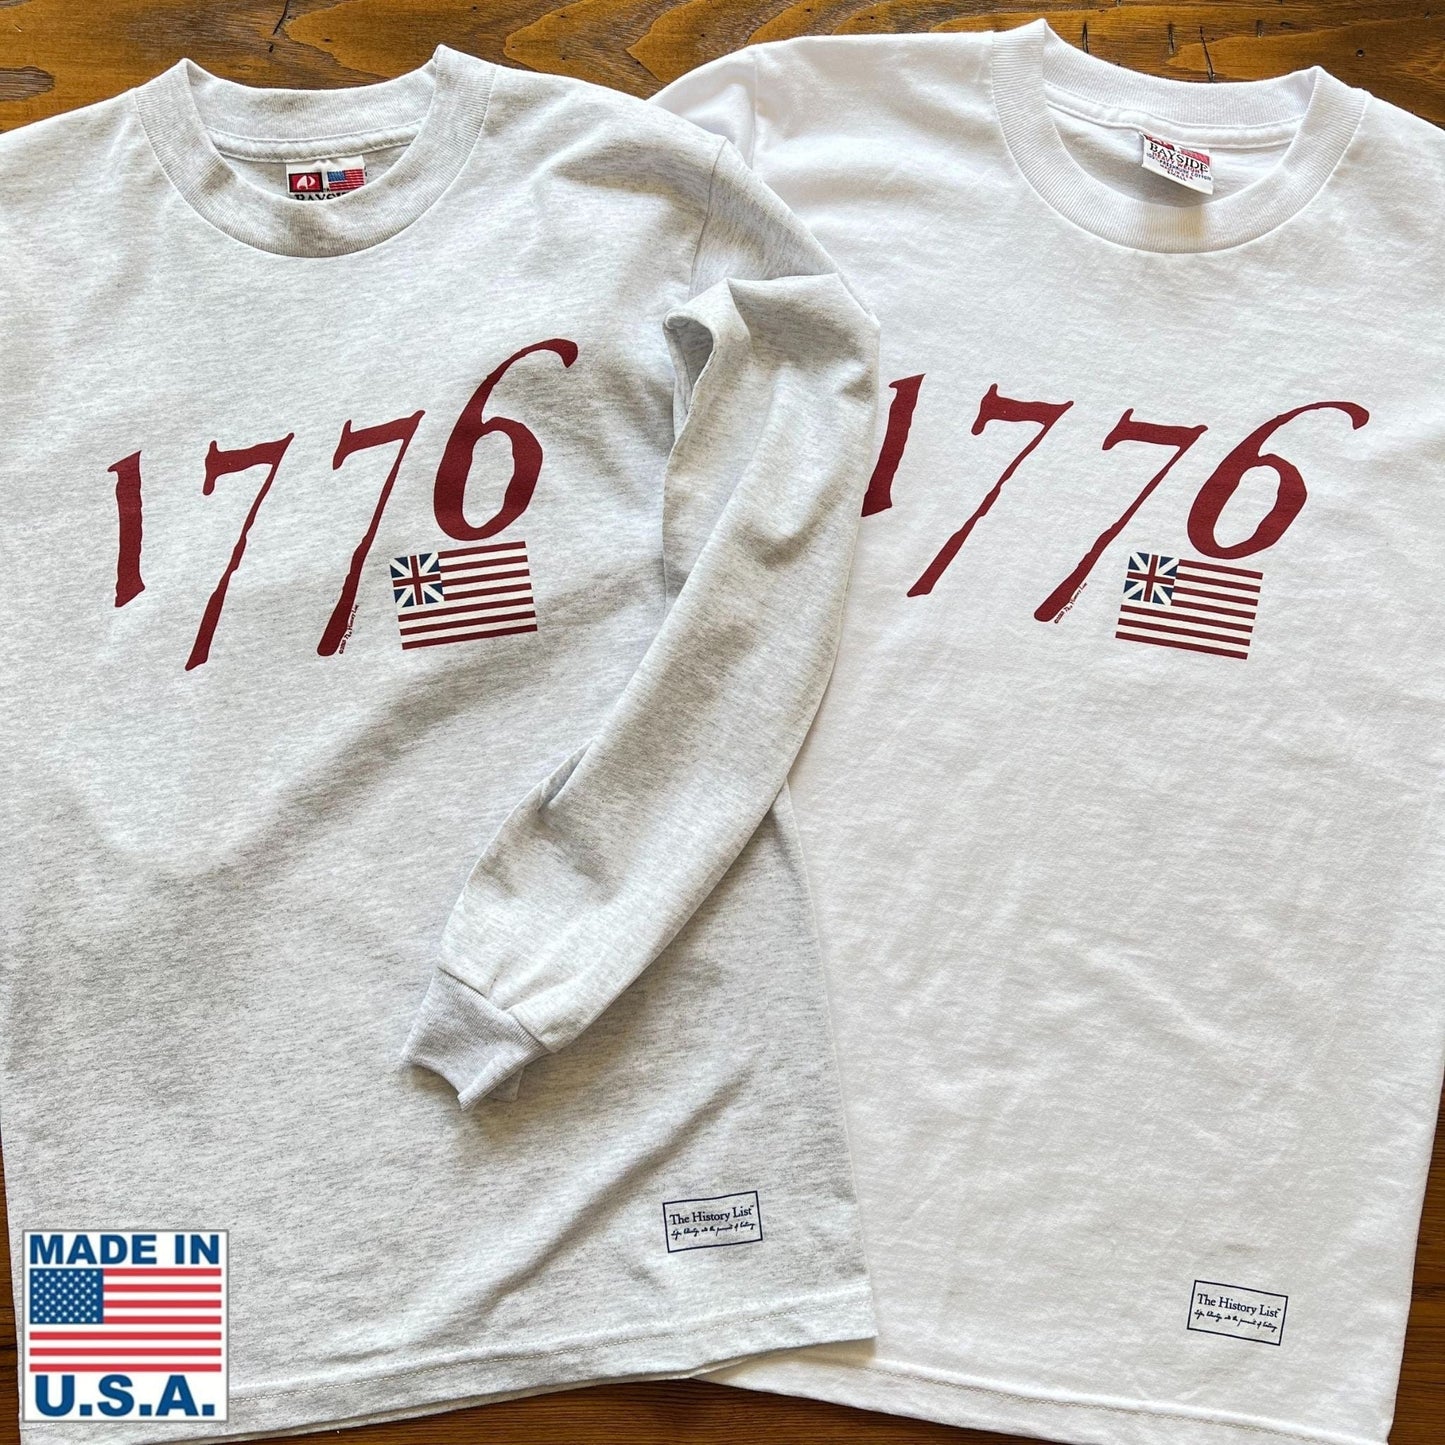 "We hold these truths - July 4, 1776” Long-sleeved shirt from the history list store